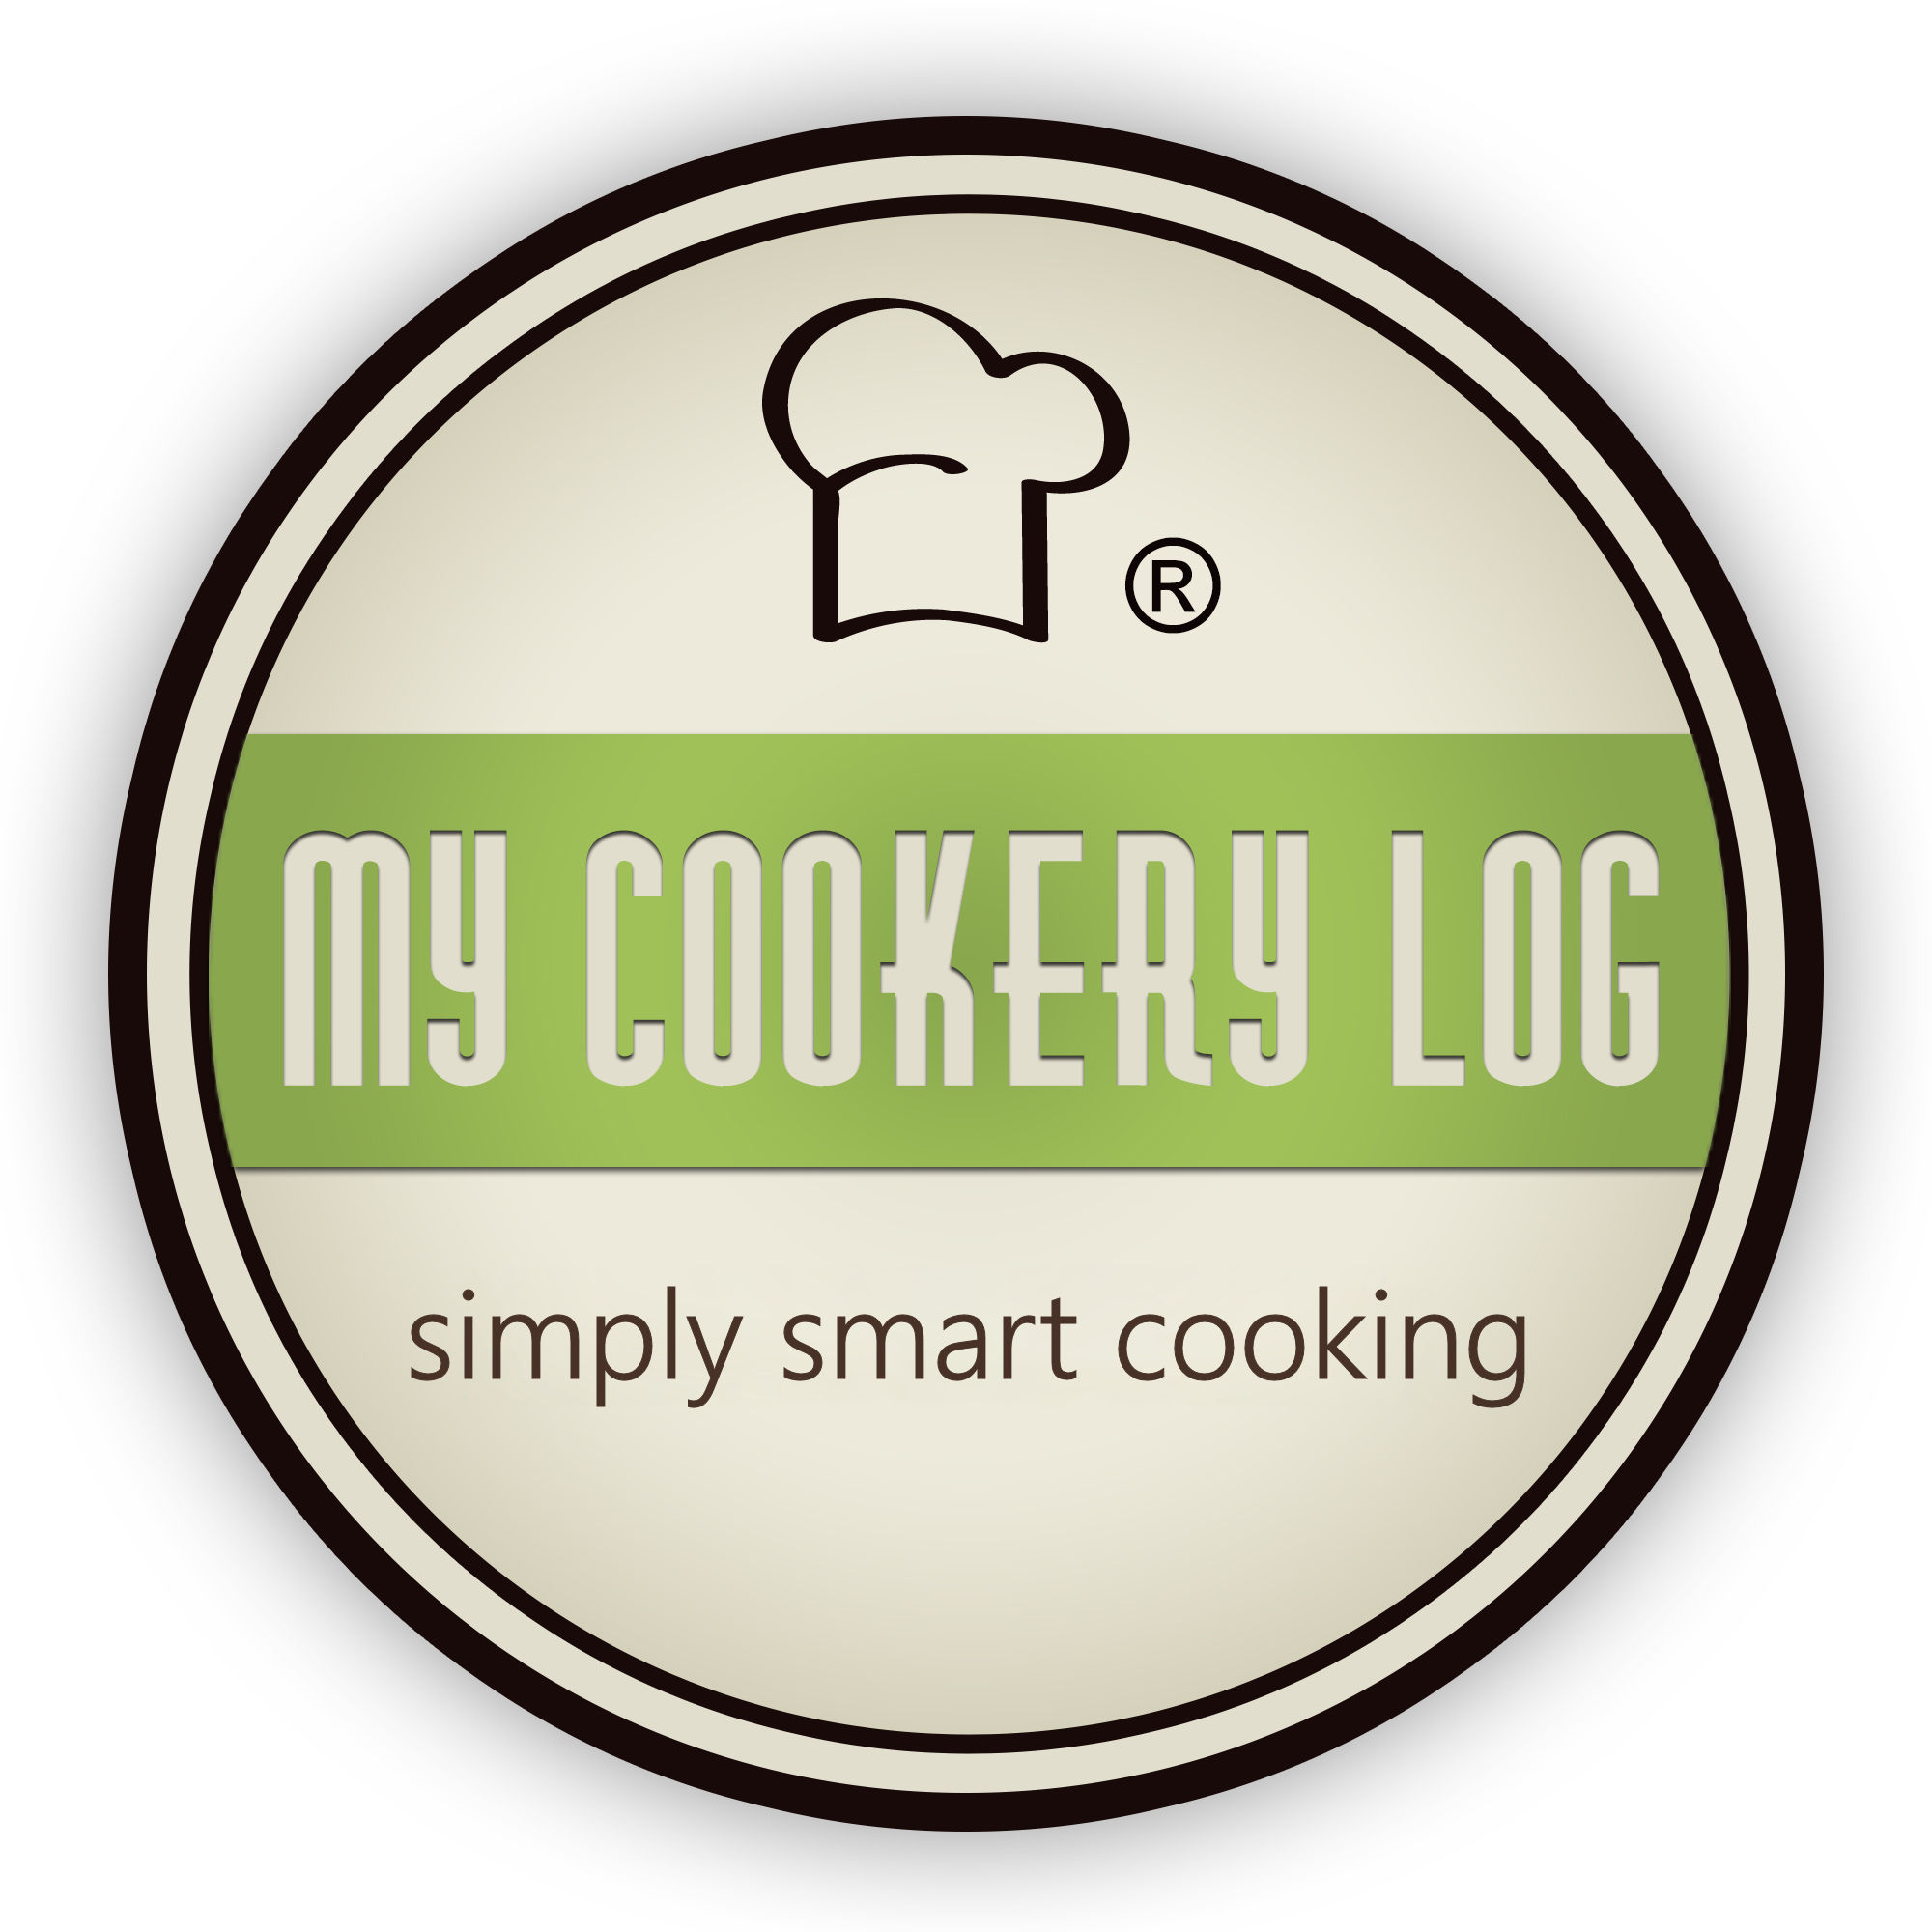 My Cookery Log° I simply smart cooking